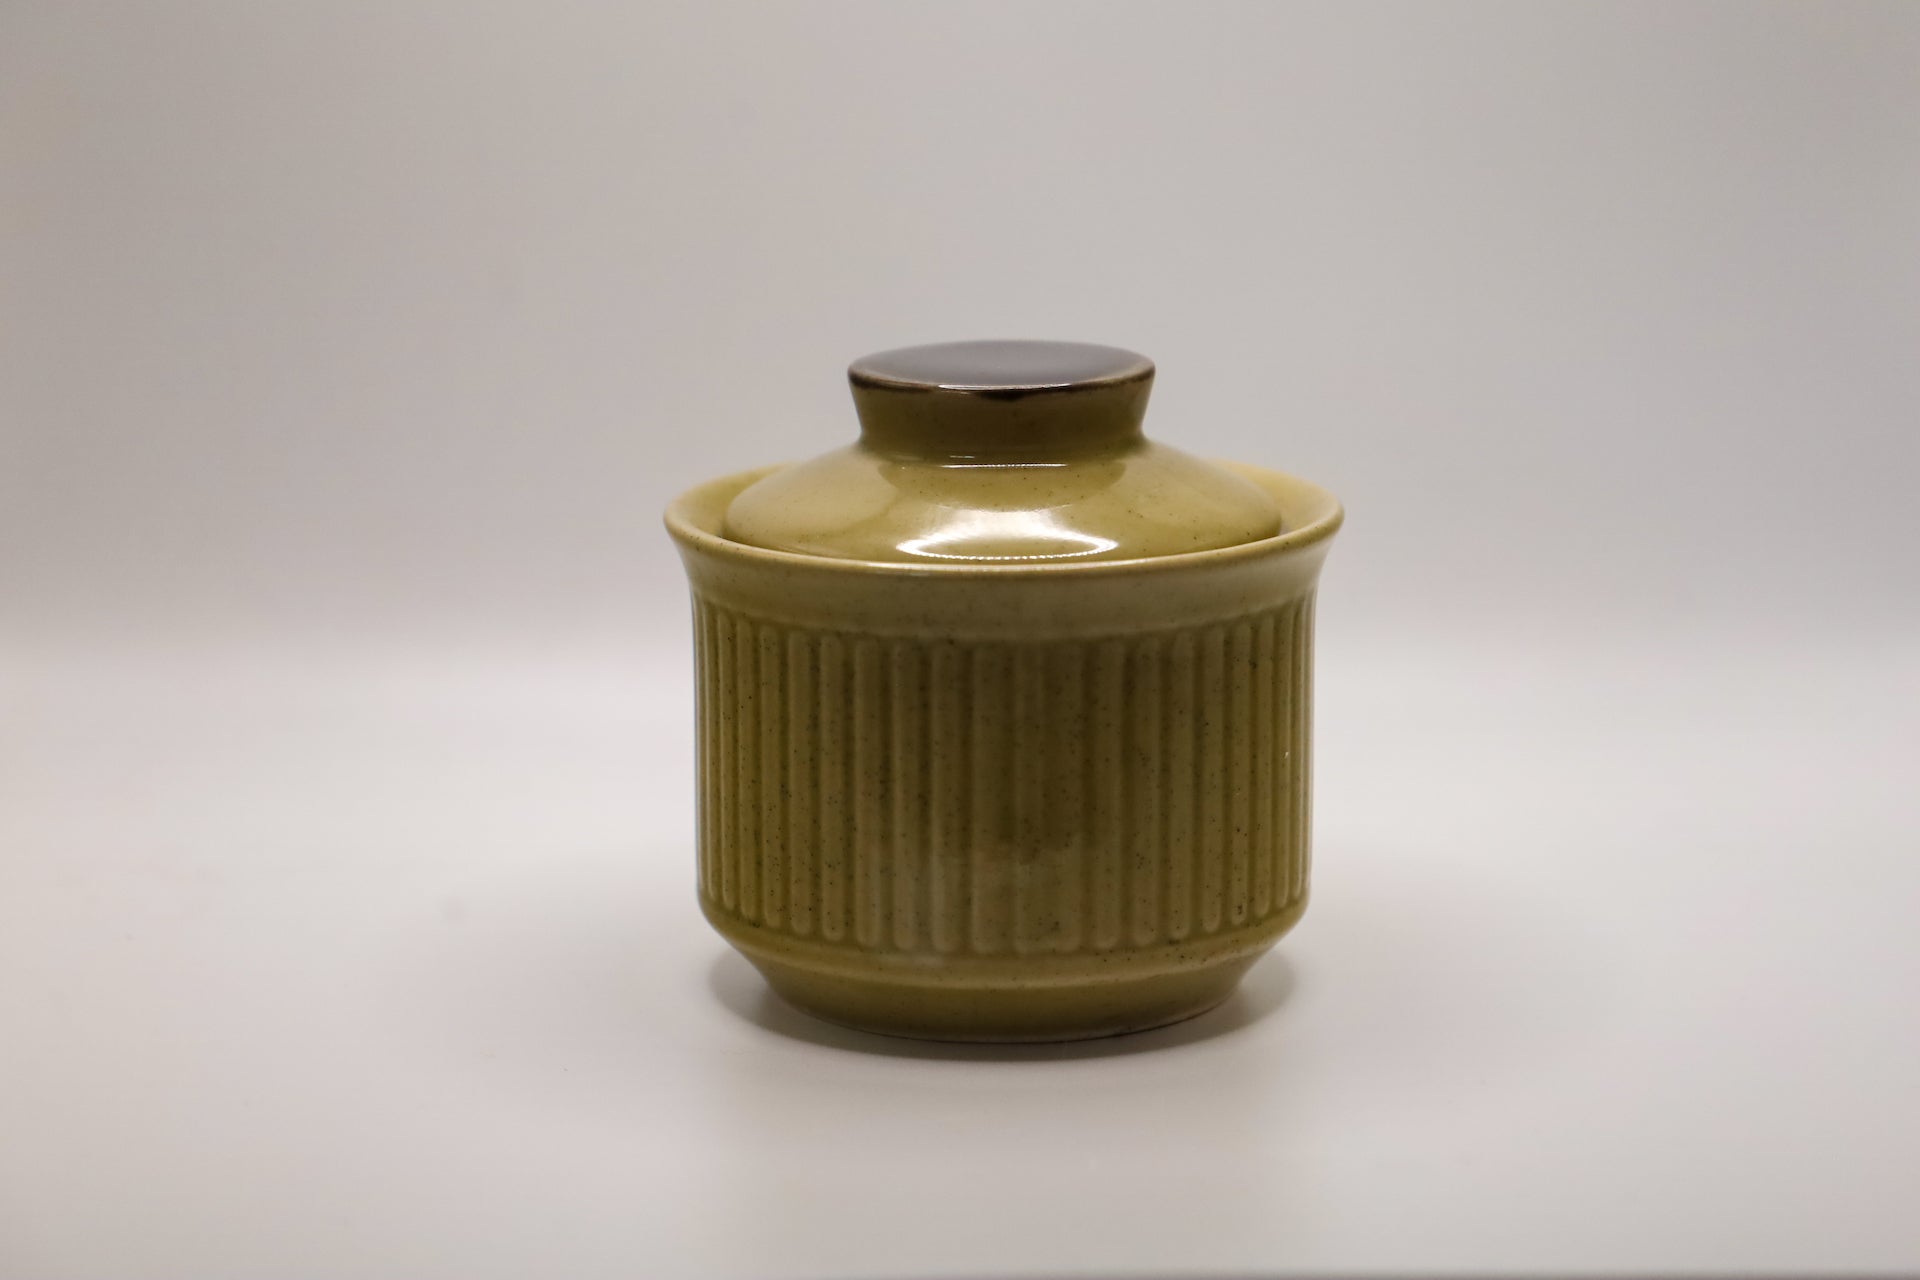 Imperial Stoneware ceramic sugar bowl with lid containing Tonka and Oud scented soy candle